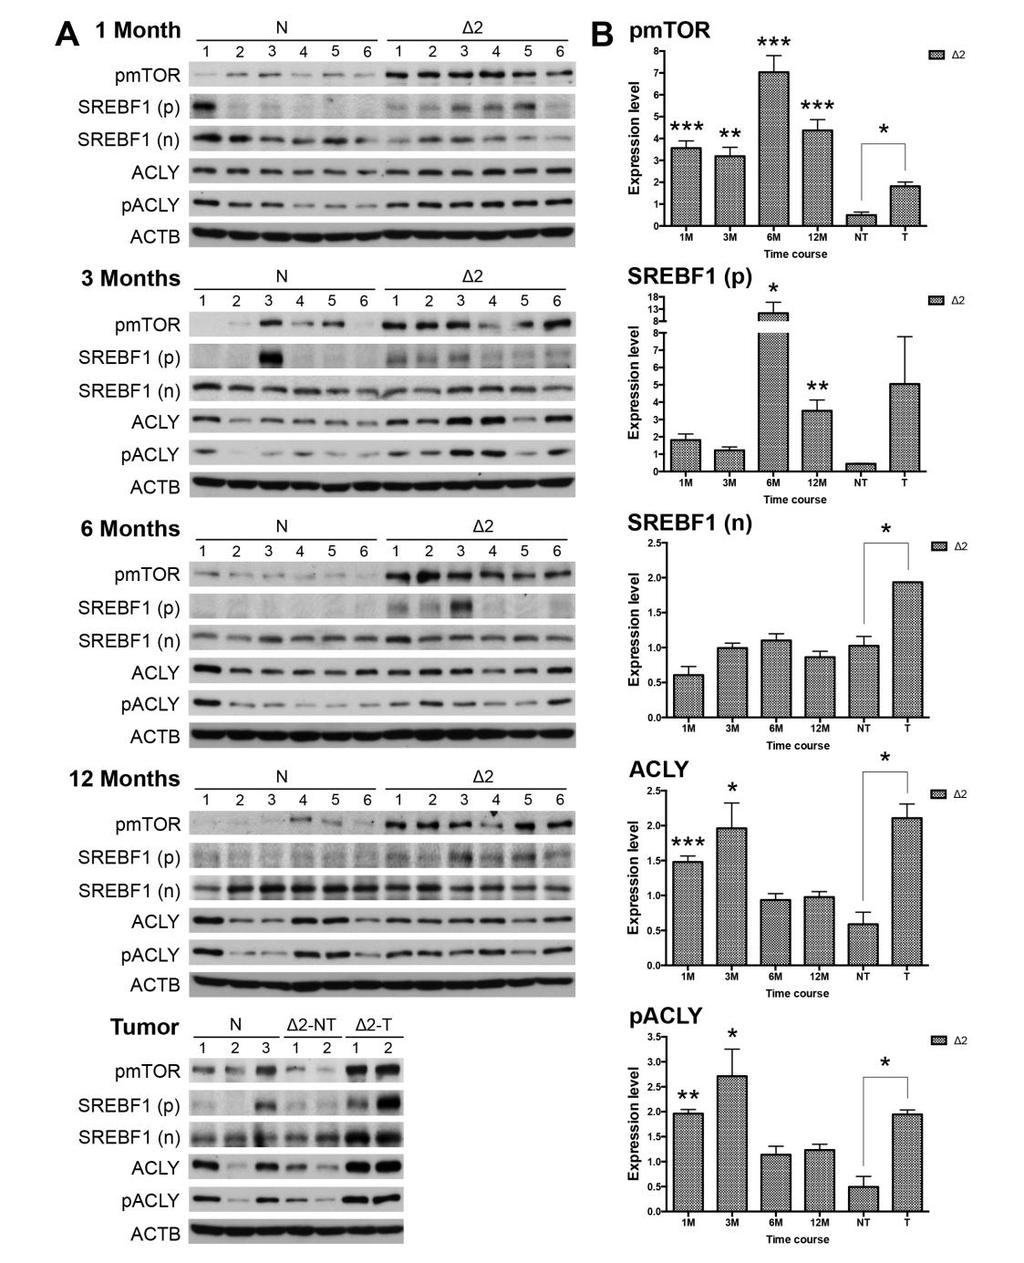 mtor, ACLY, and SREBF1 signals were chronologically activated in